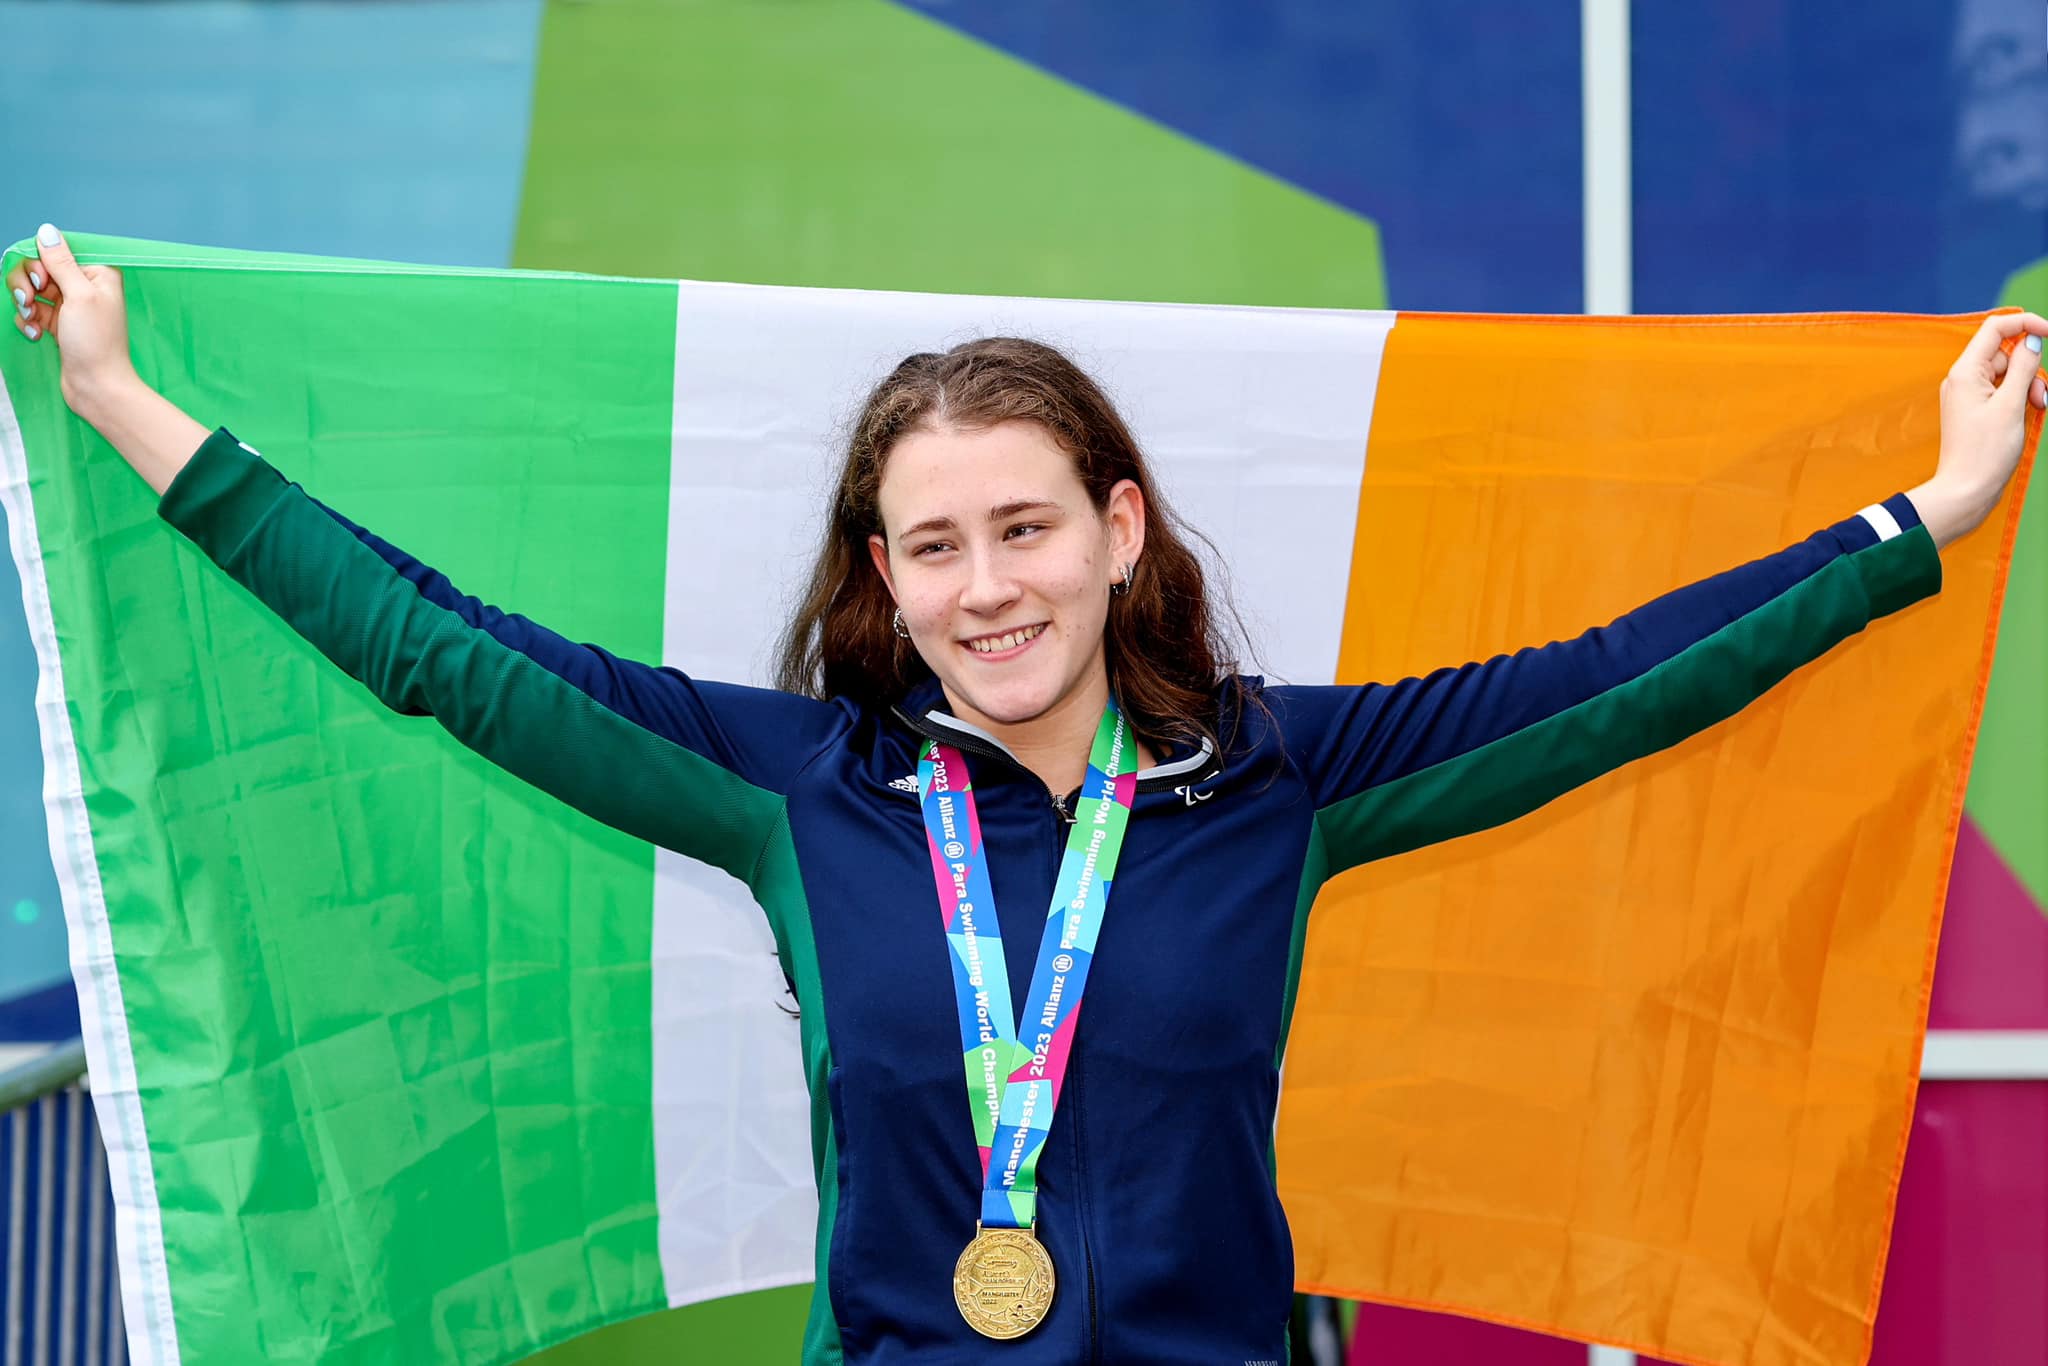 Roisin Ni Riain stands holding an Ireland flag behind her and a gold medal around her neck